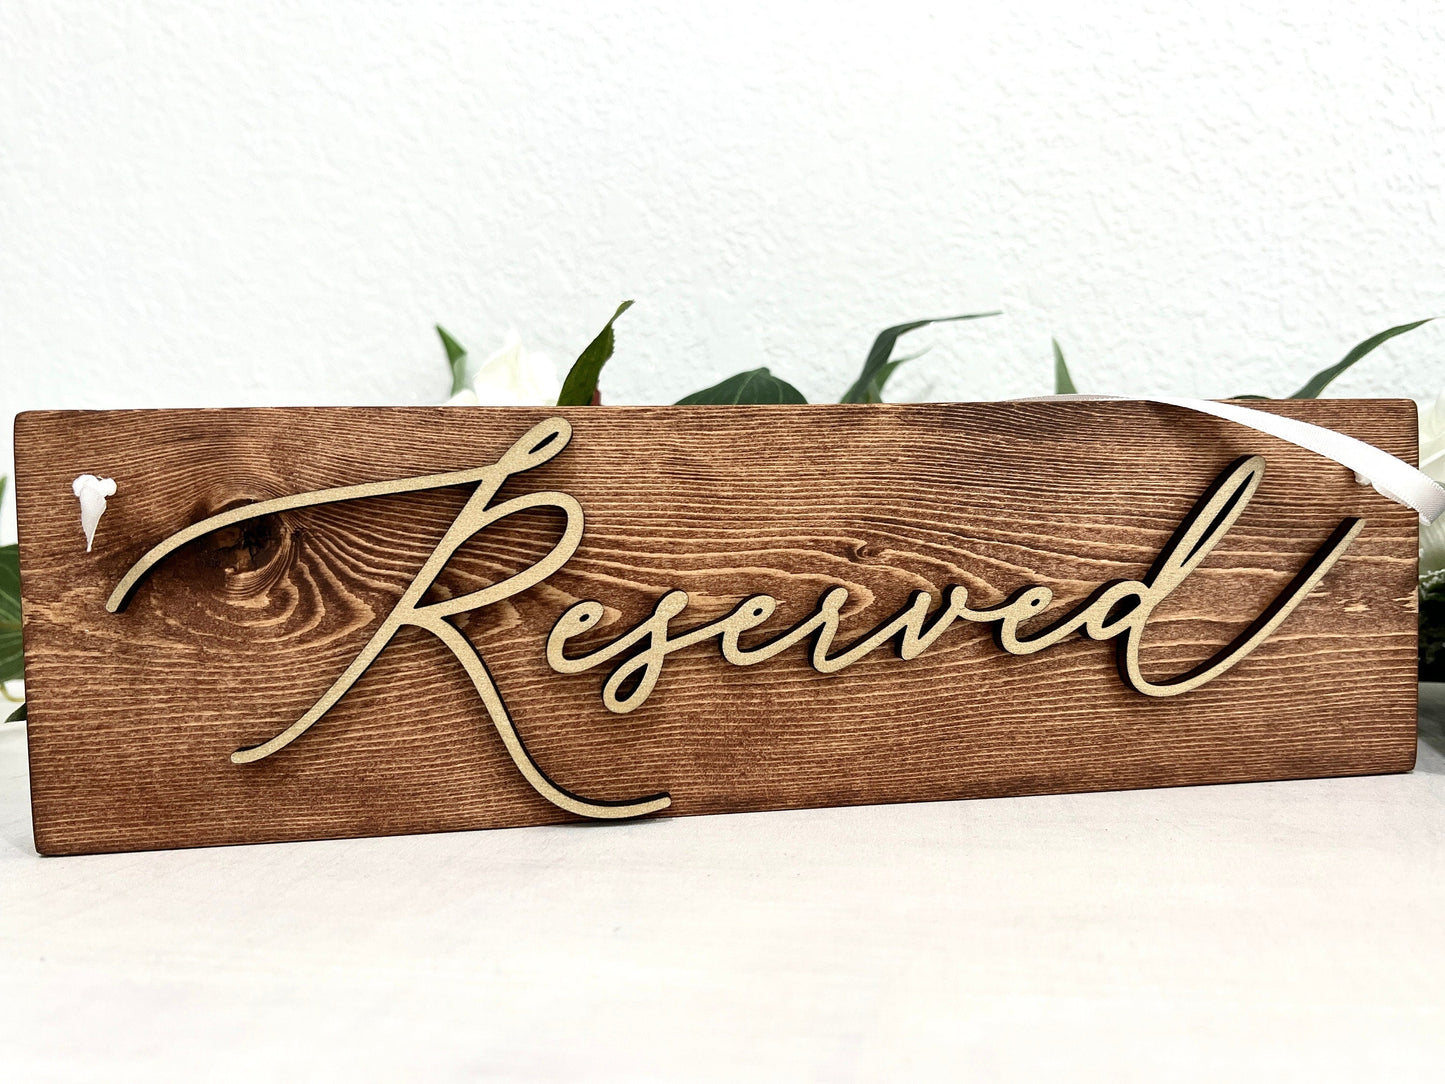 table reserved sign - Woodbott